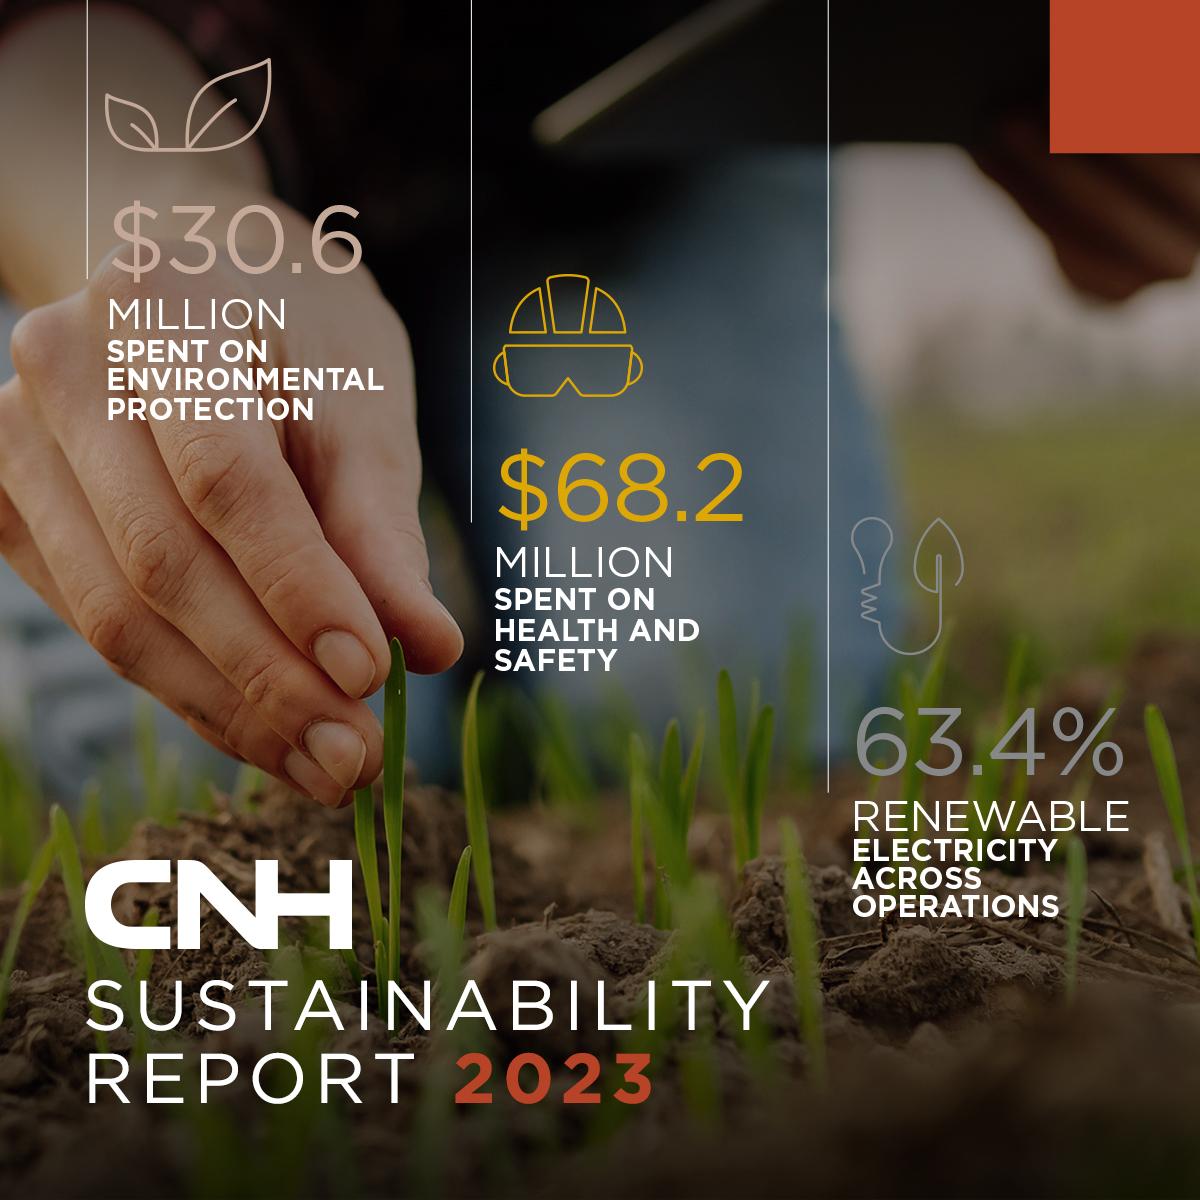 "CNH Sustainability Report 2023" with three statistics. The background is a close up of a person touching a seedling in the ground.